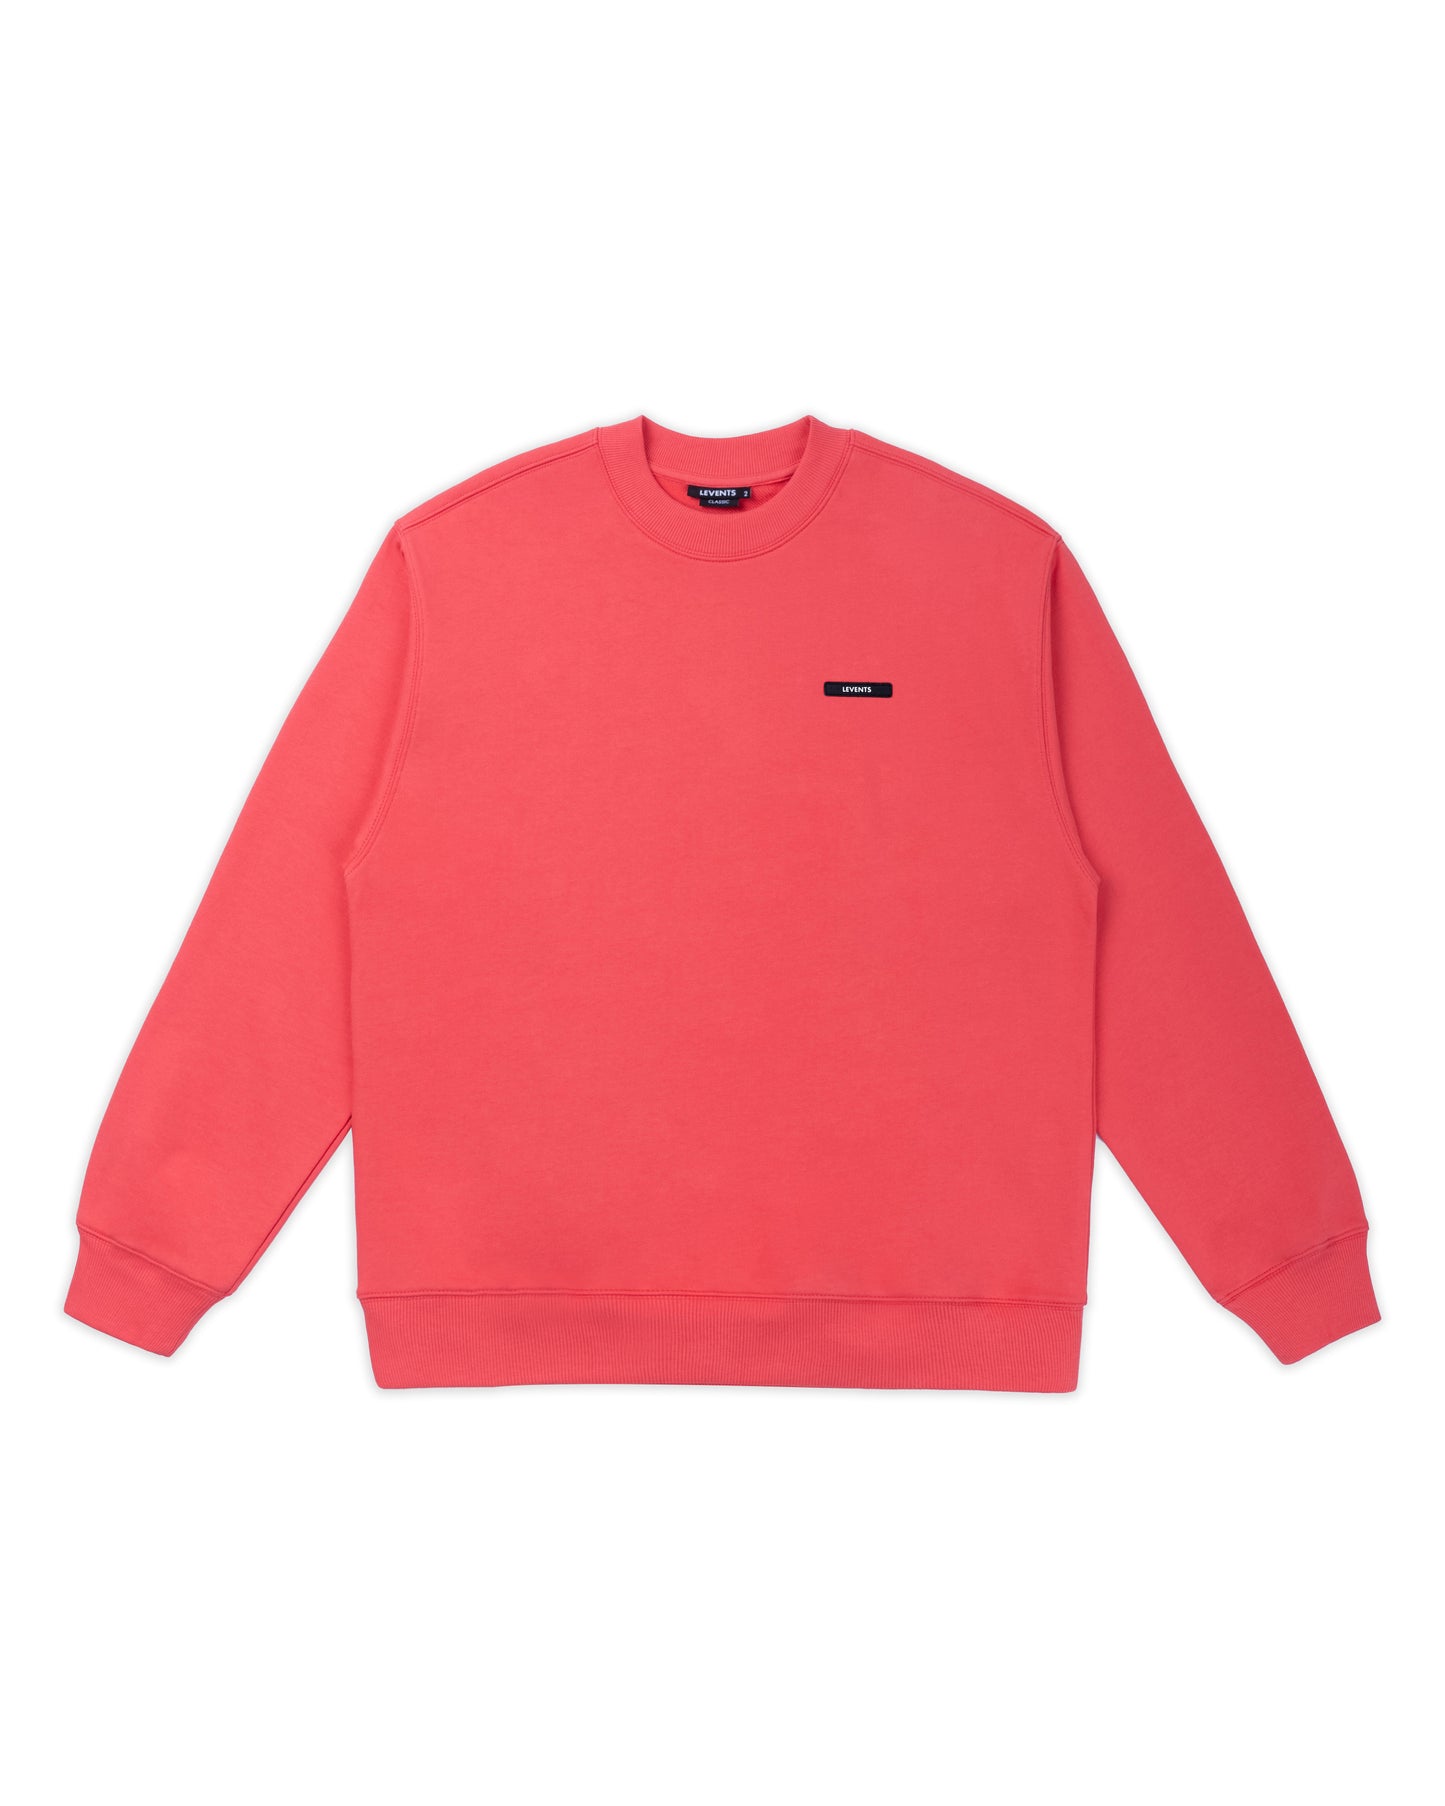 Levents® Classic Sweater/ Red Coral